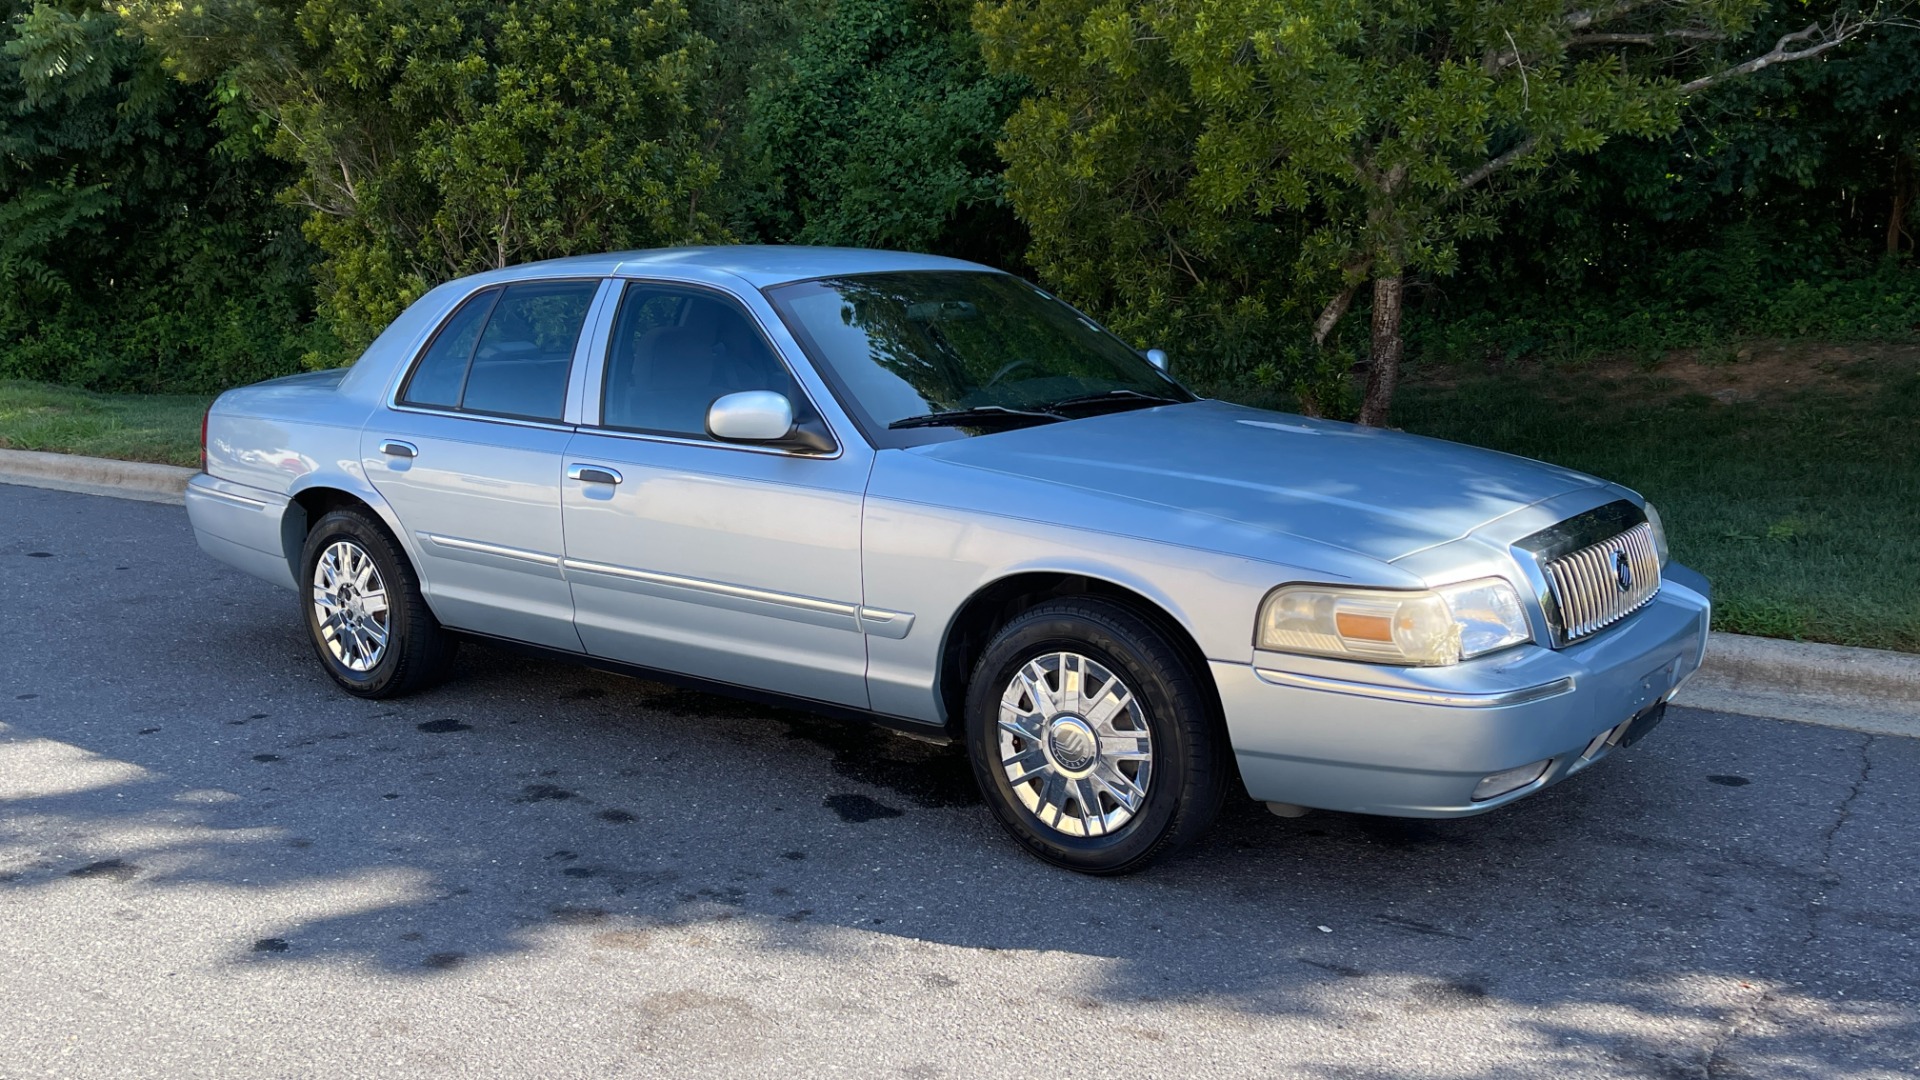 Used 2008 Mercury Grand Marquis GS / KEYLESS ENTRY / 8 WAY DRIVER SEAT / GS CONFIDENCE for sale $11,999 at Formula Imports in Charlotte NC 28227 2